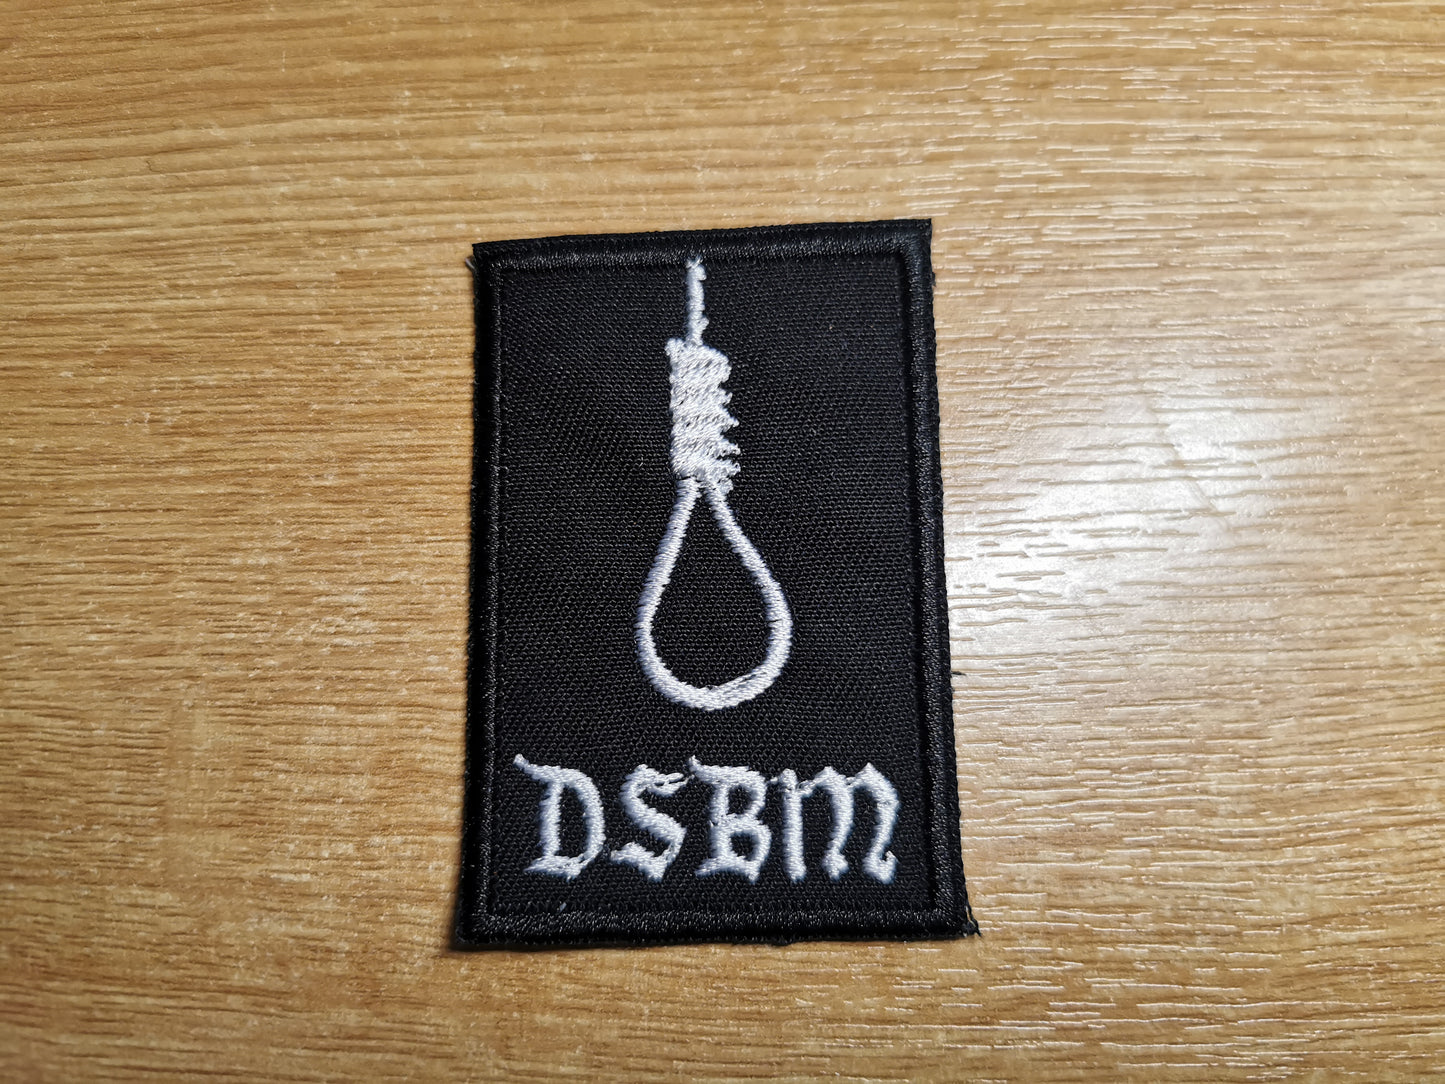 Depressive Black Metal Embroidered Patch White with Black Border